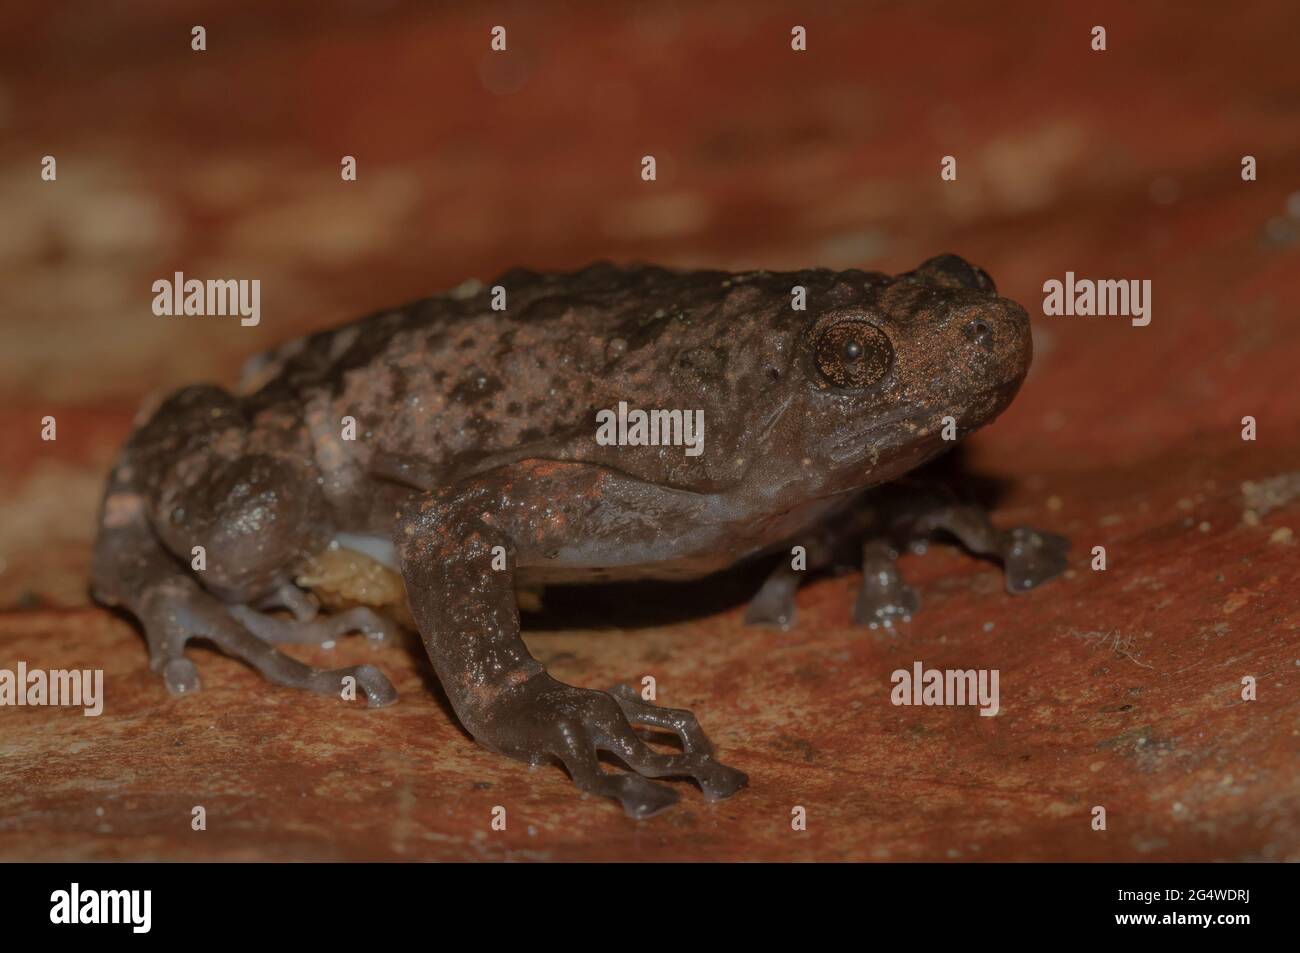 Frog on a leaf; tiny frog; cute froggy; Uperodon nagaoi from Sri lanka; Endemic to Sri Lanka; frogs in the city; Stock Photo